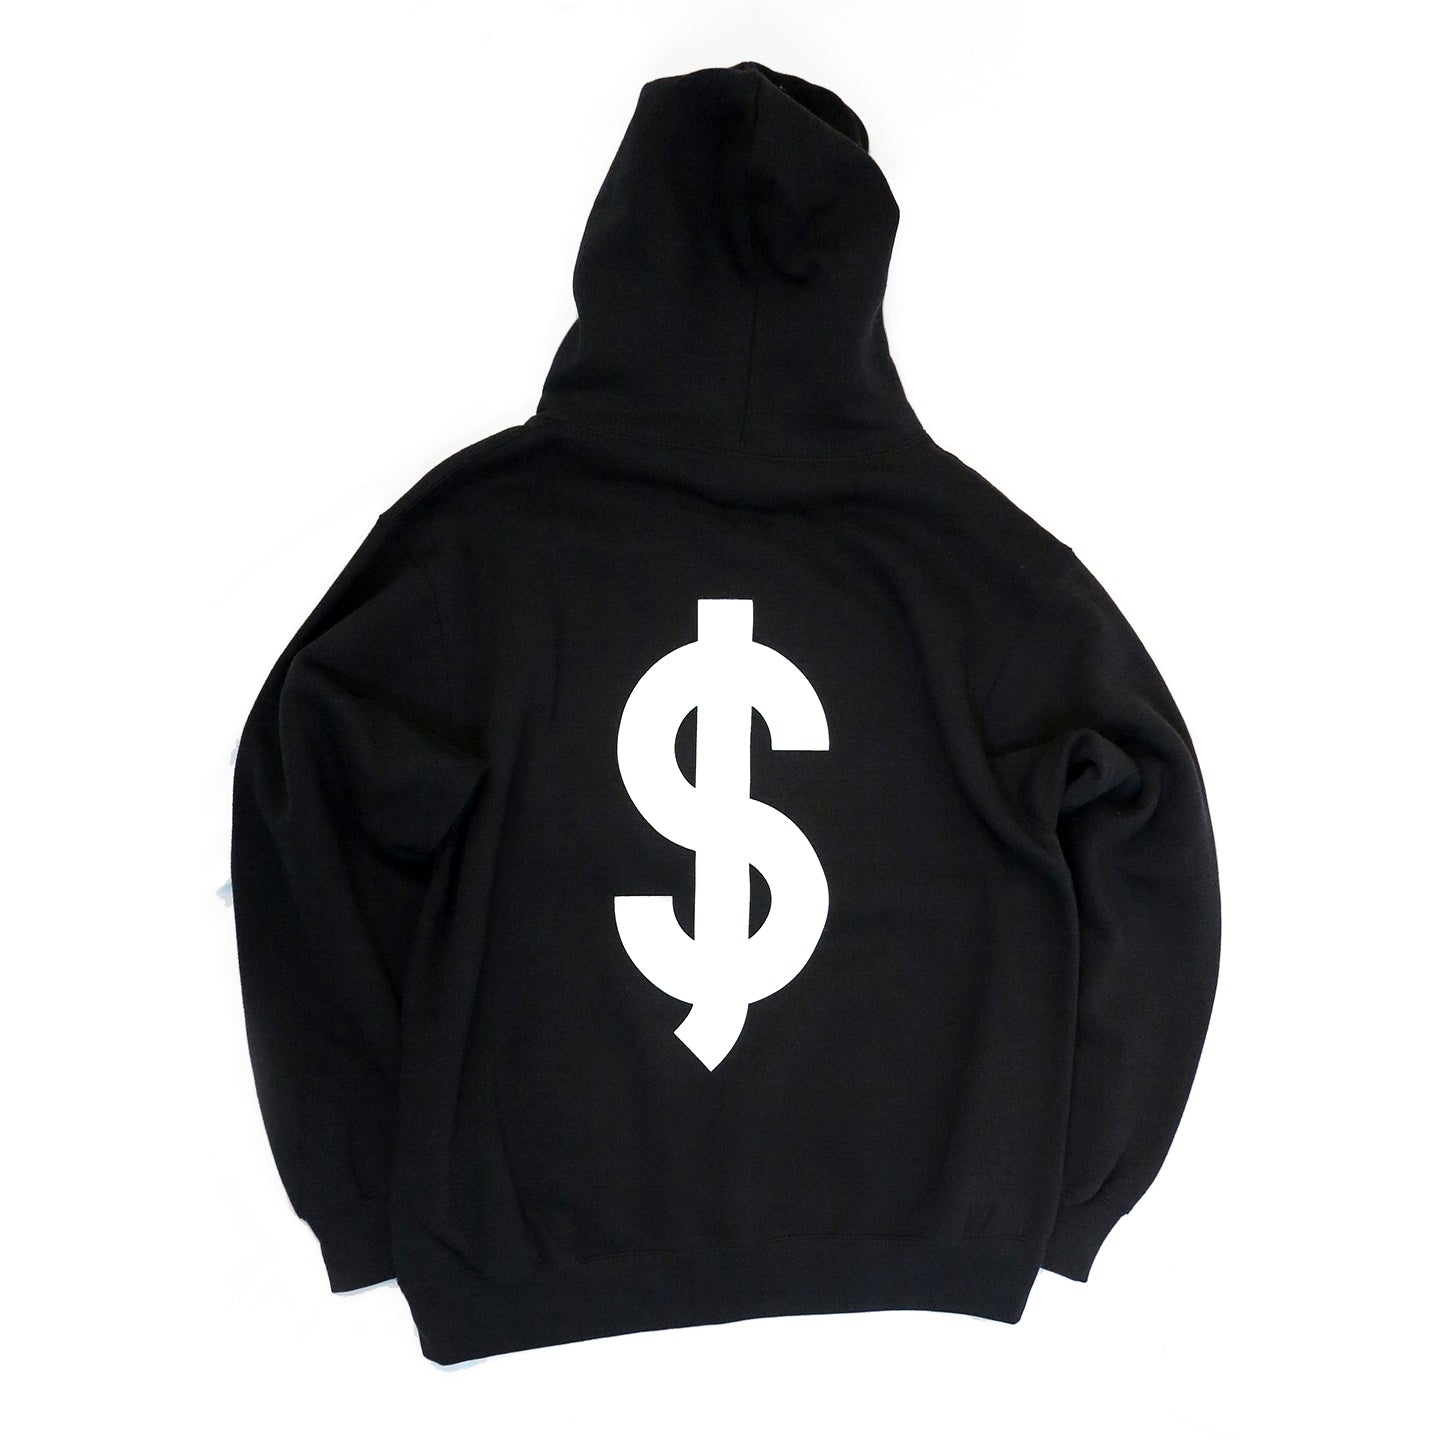 EXTRA MARKET X CARROT'S X GRILLO'S PICKLES X $™ - HOODED SWEATSHIRT